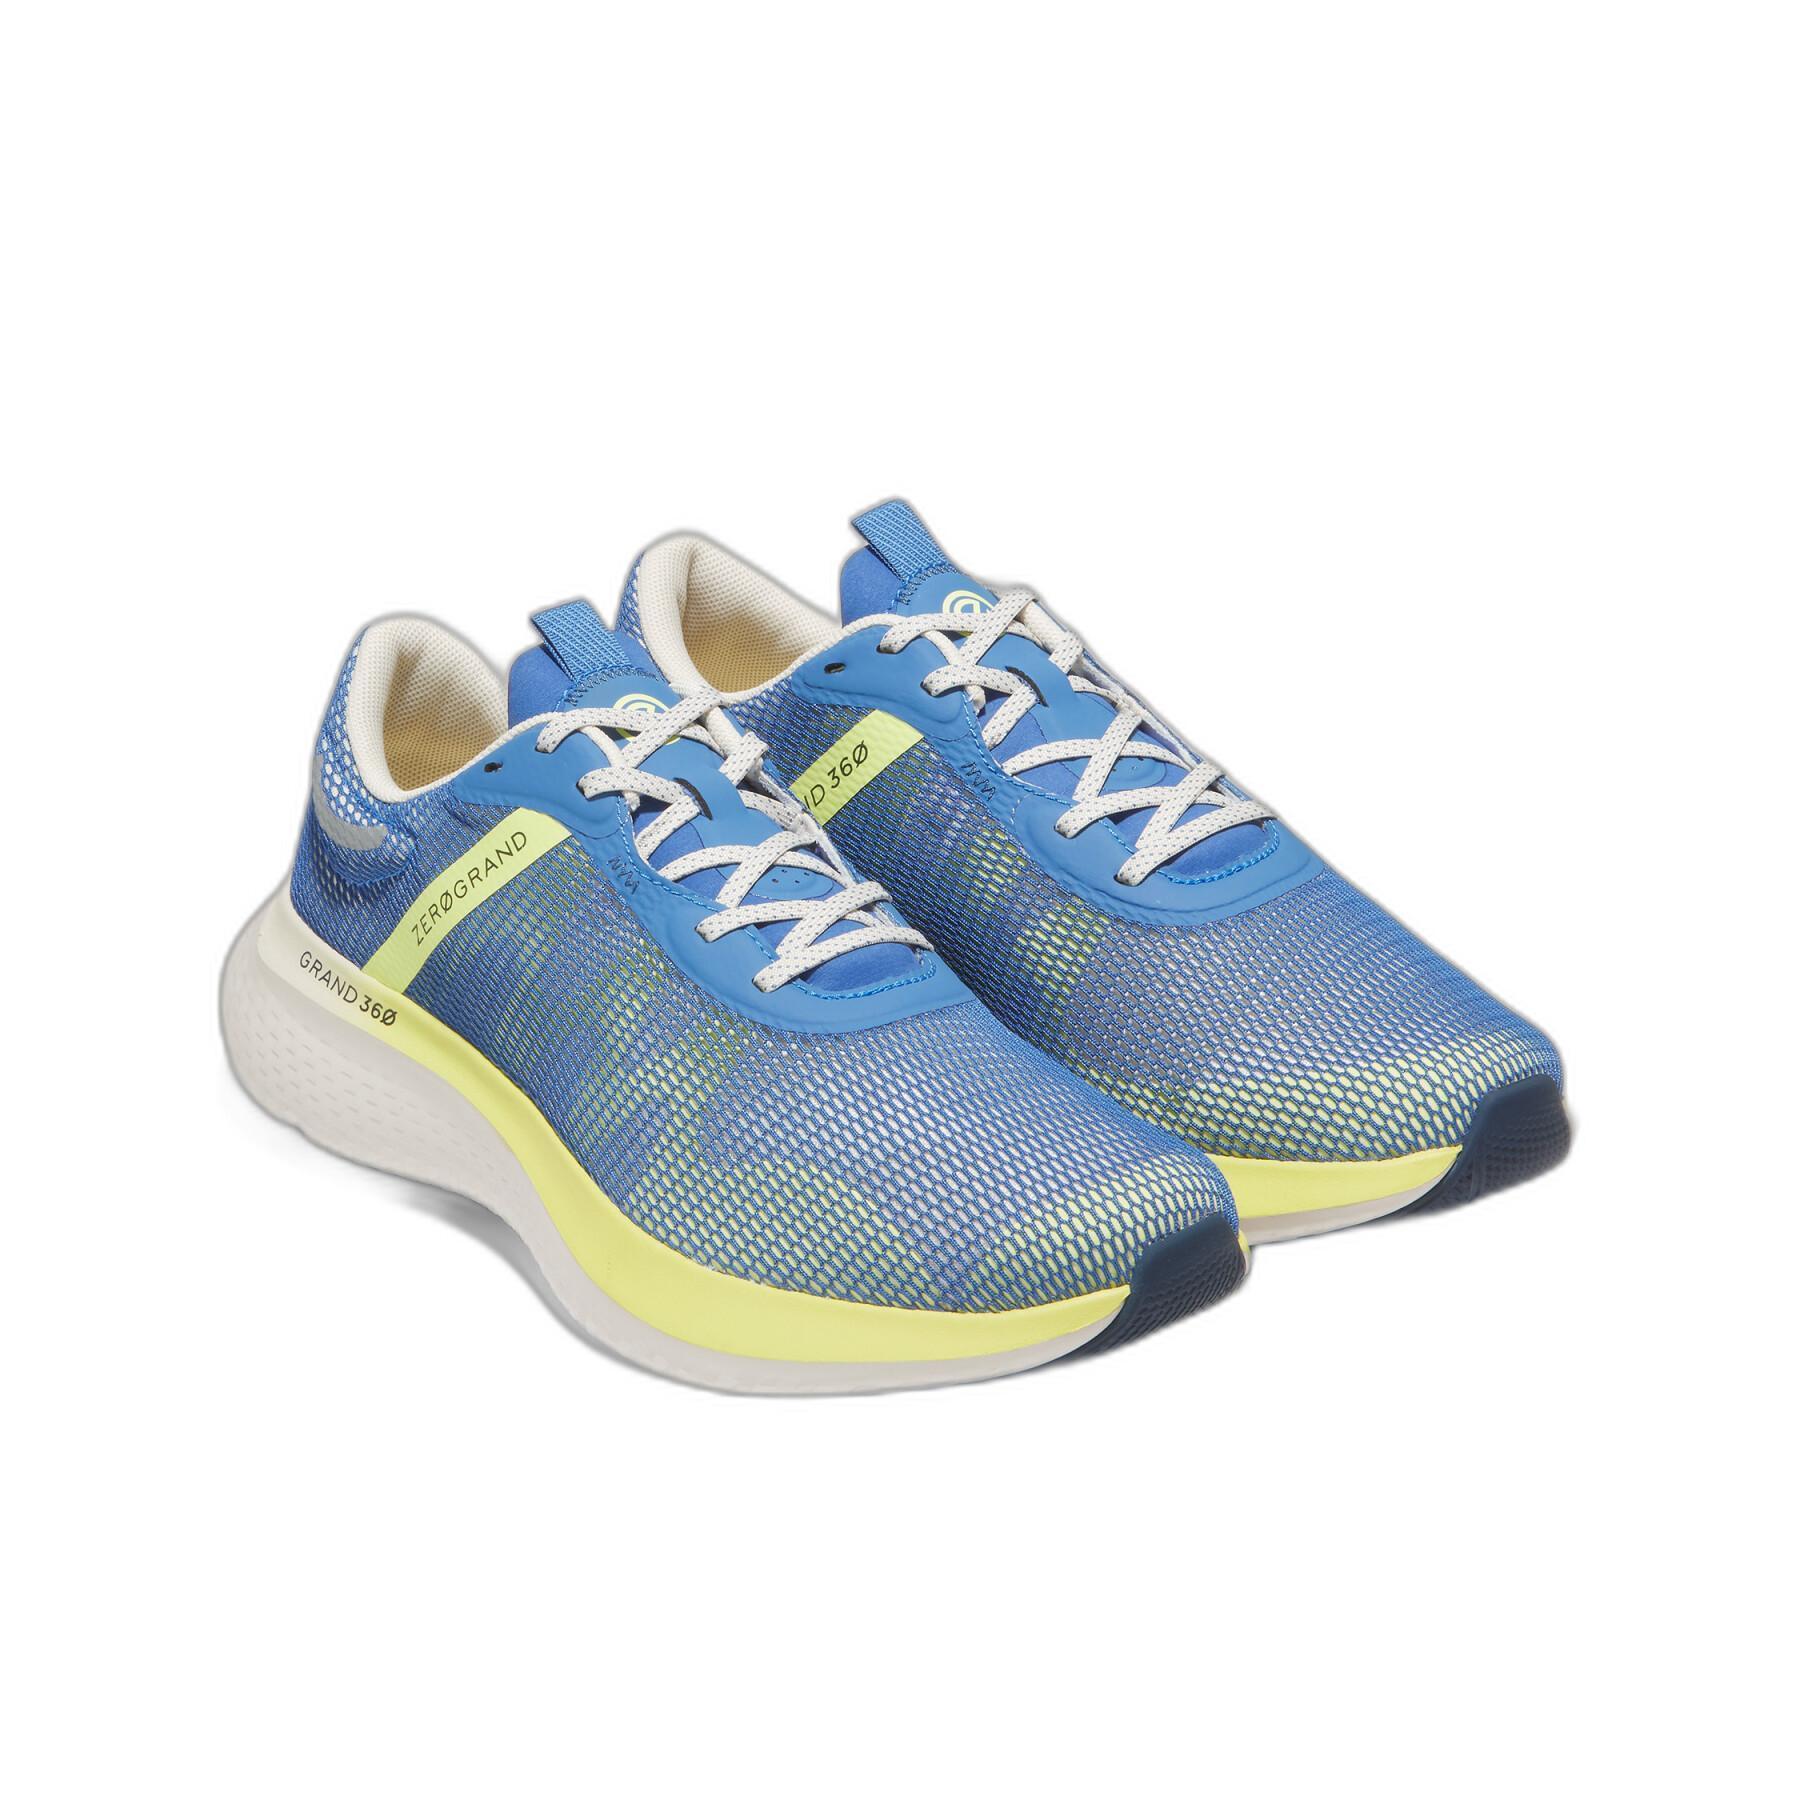 Running shoes Cole Haan Zerogrand Outpace II